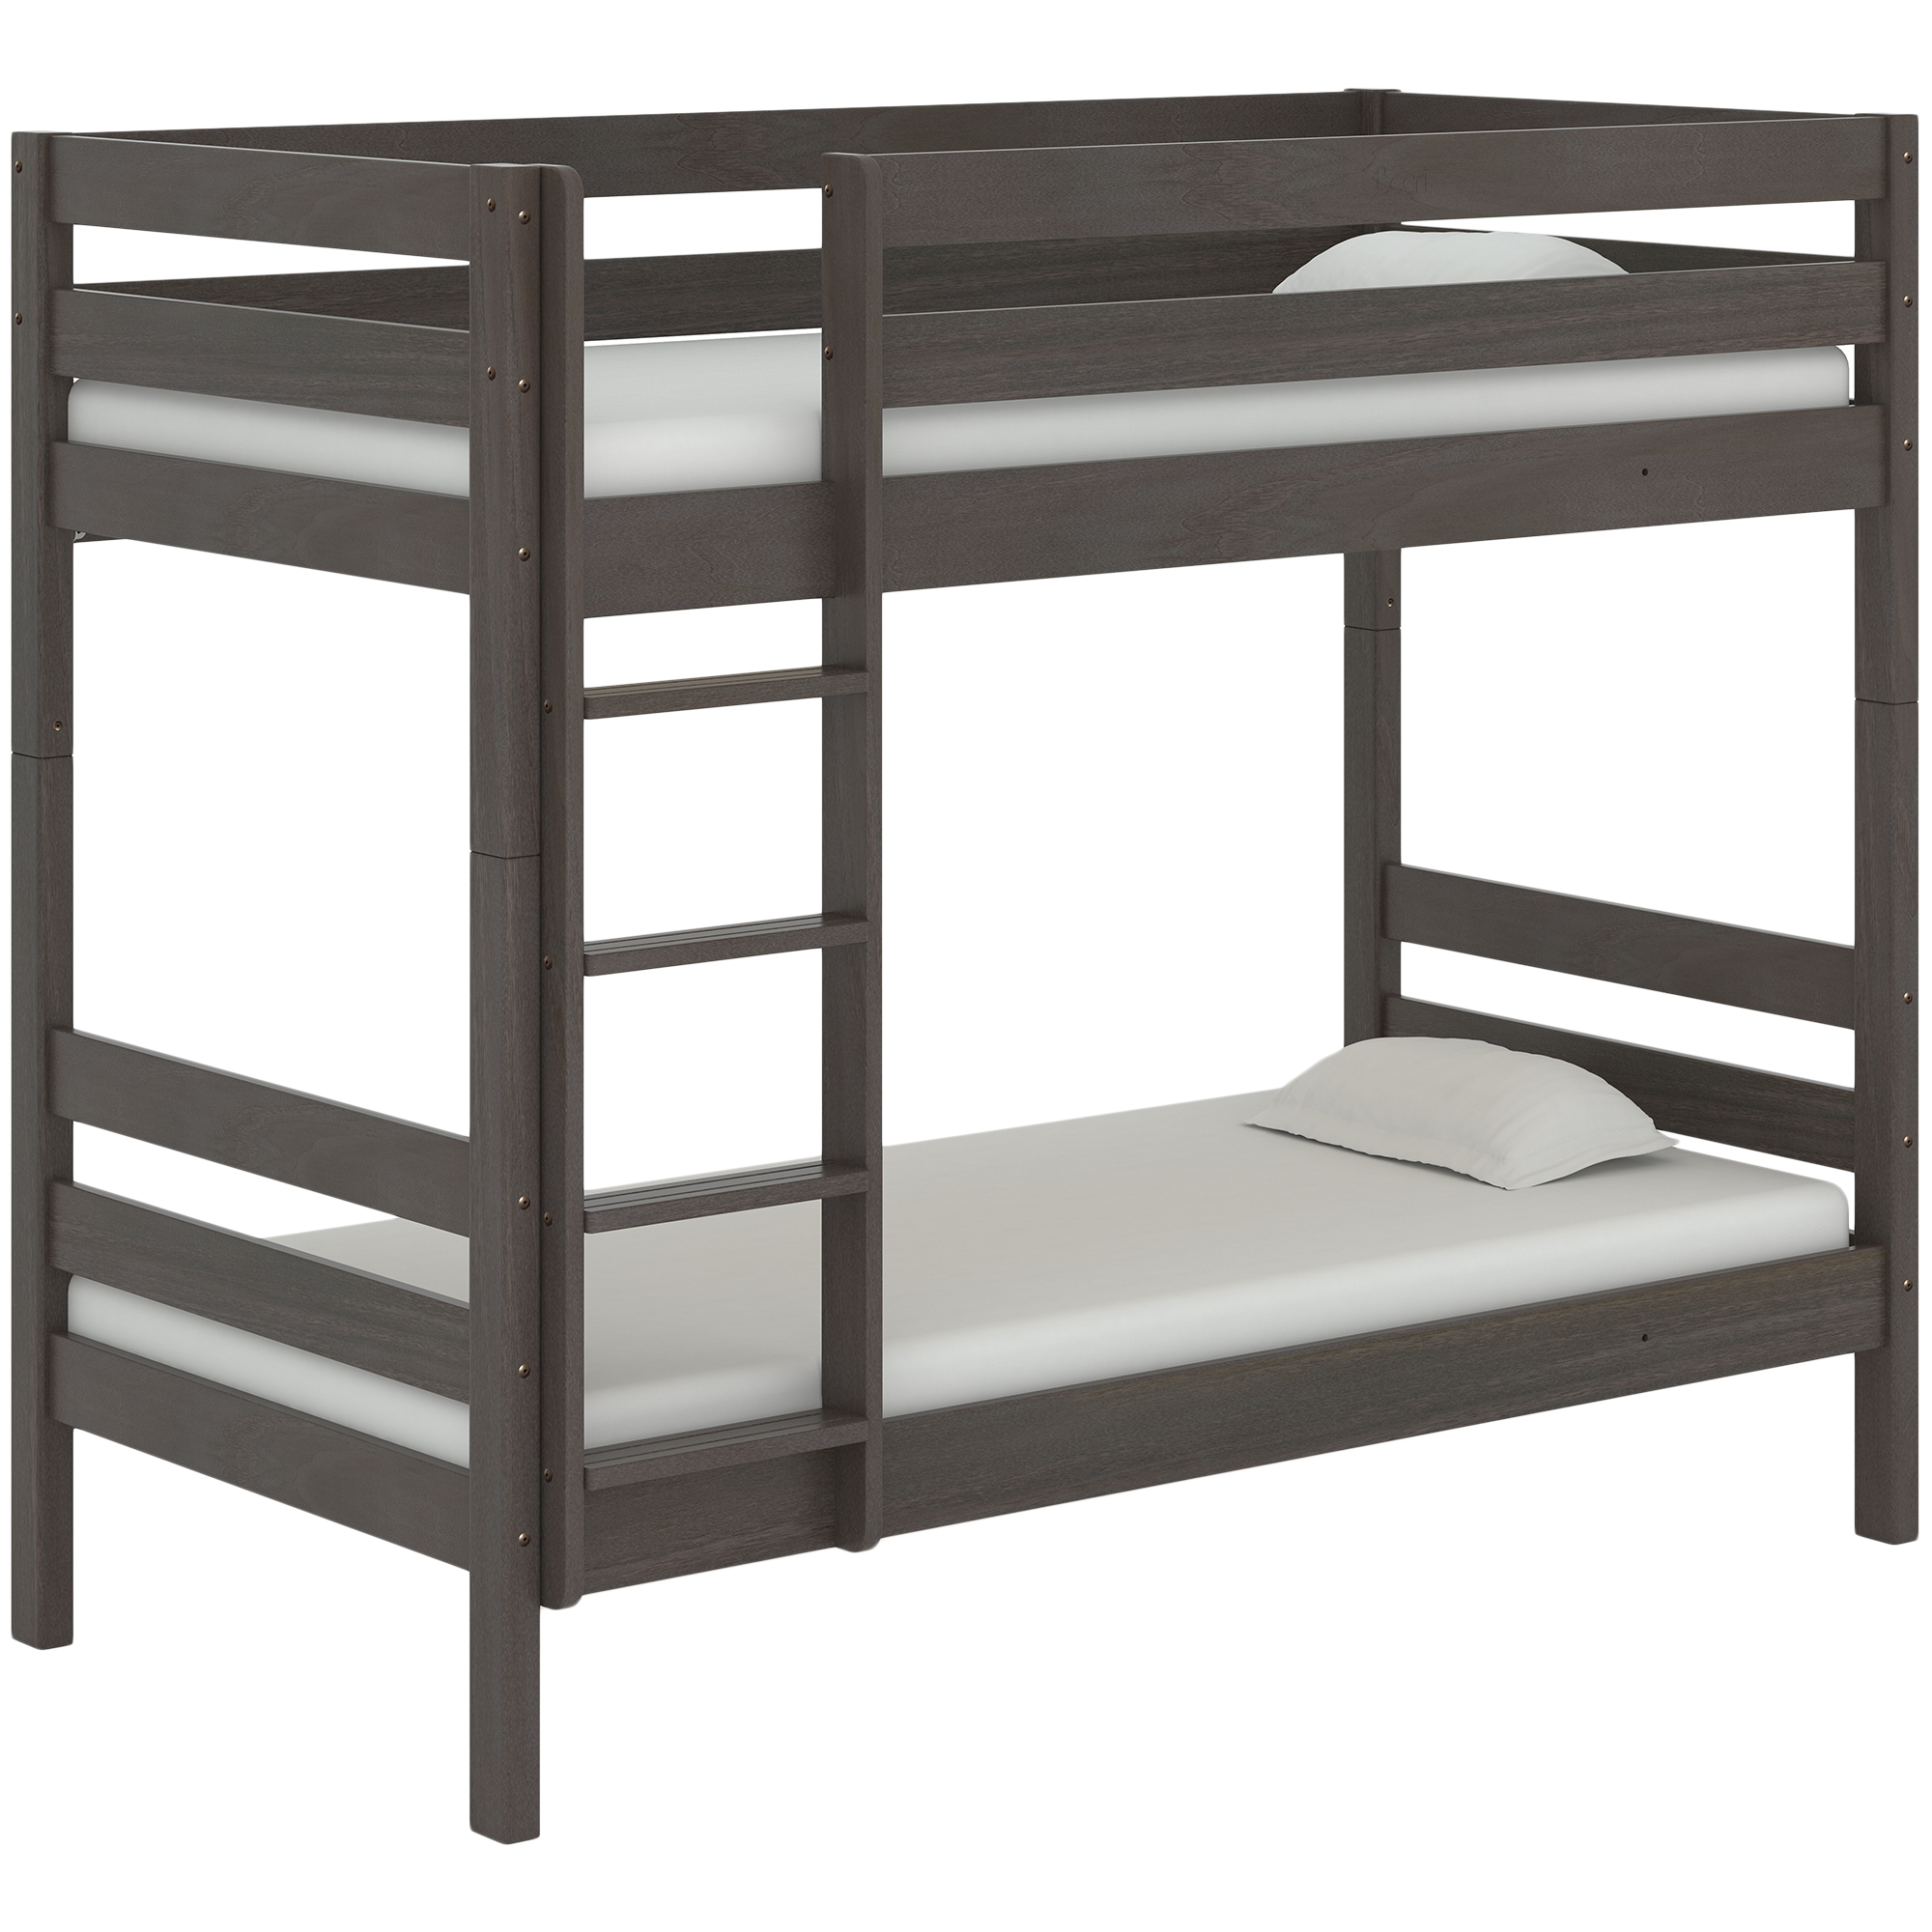 Boori Scout Single Bunk Bed Temple Webster